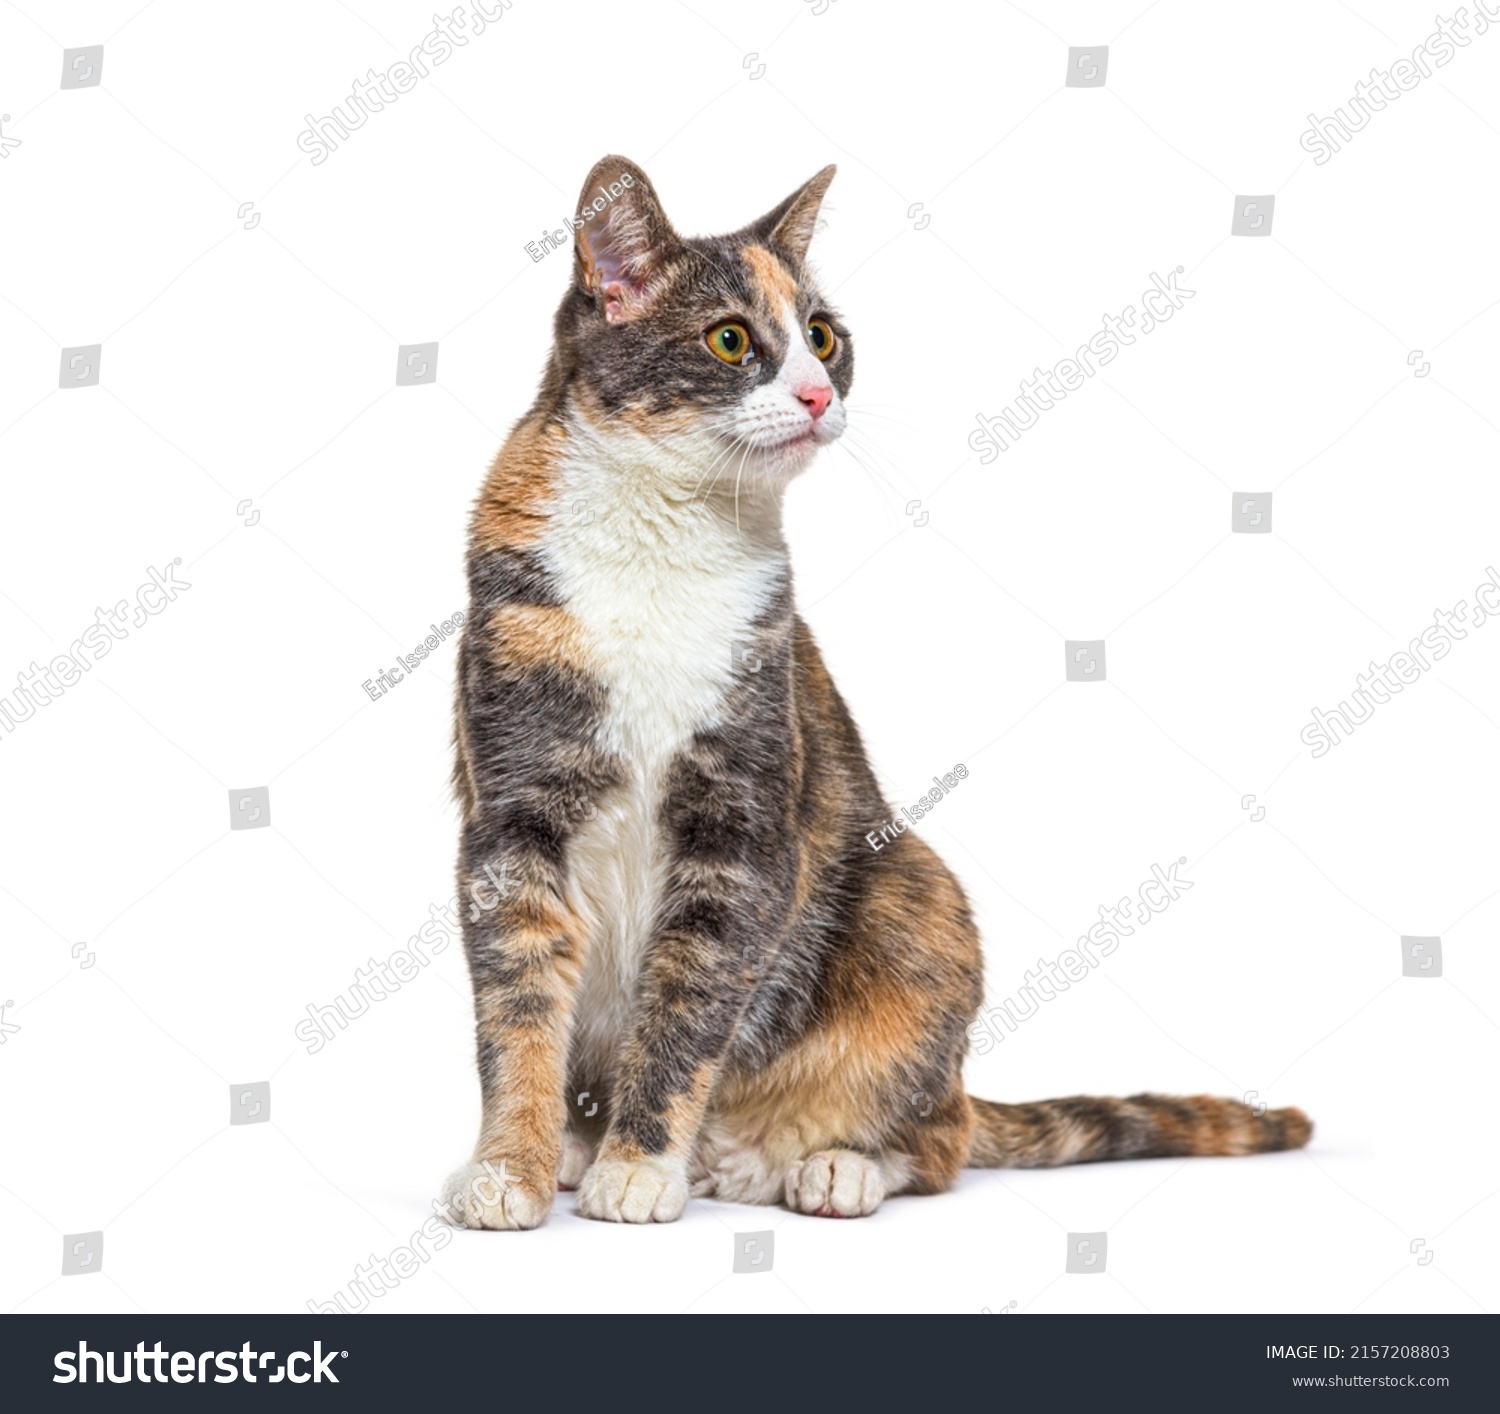 Mixed breed cat with yellow eyes sitting, isolated  #2157208803